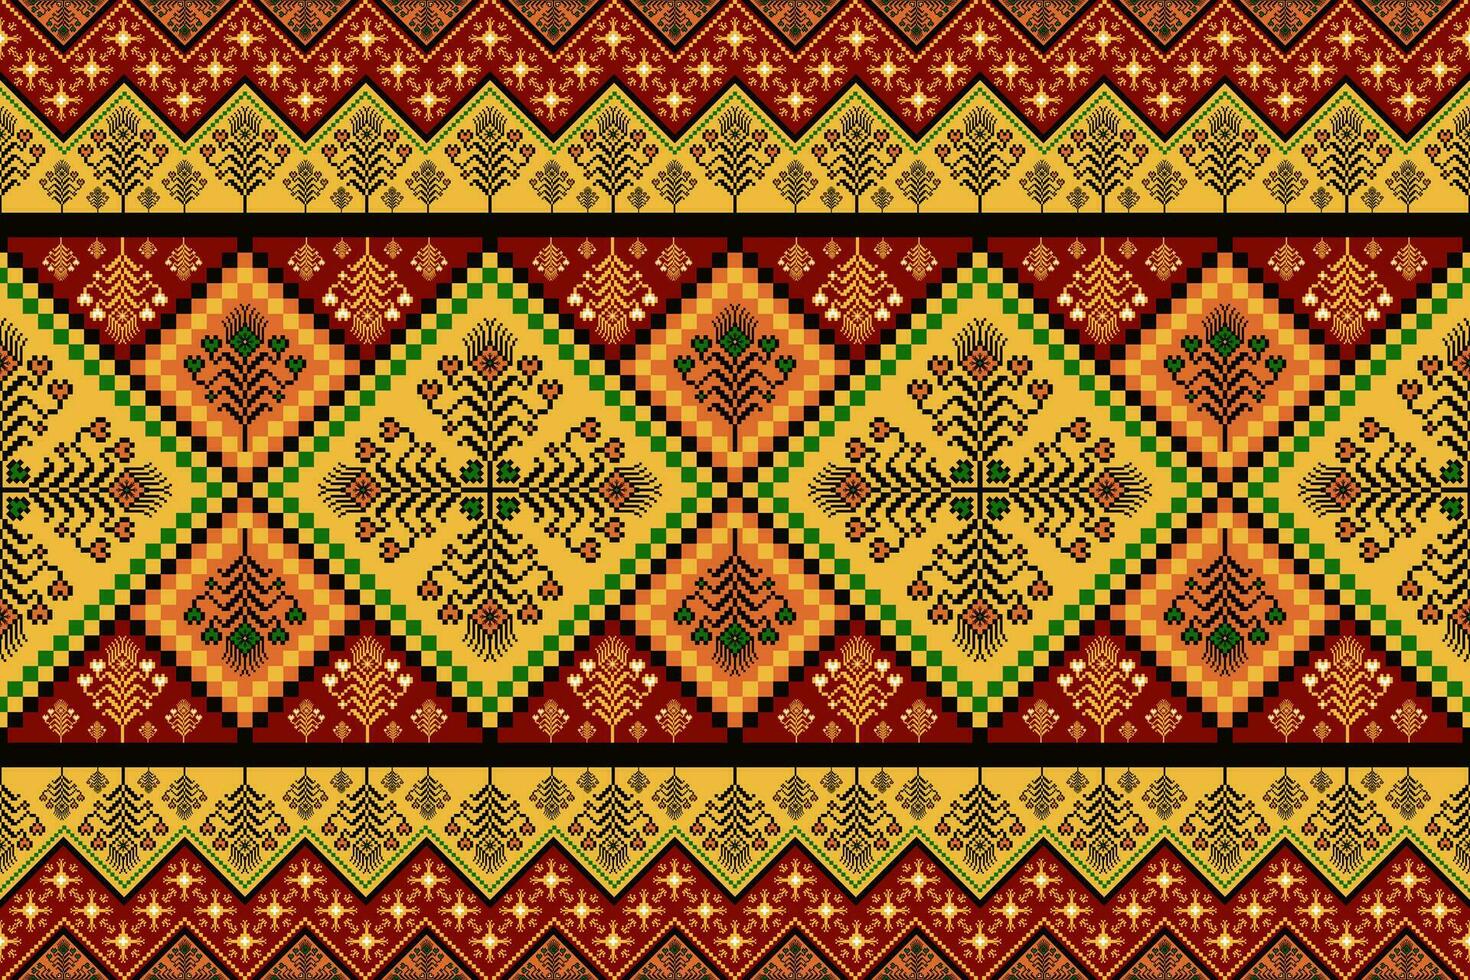 Ethnic colorful geometric traditional embroidery pattern. Colorful ethnic geometric floral pixel art seamless pattern. Ethnic stitch pattern use for fabric, textile, home decoration elements. vector